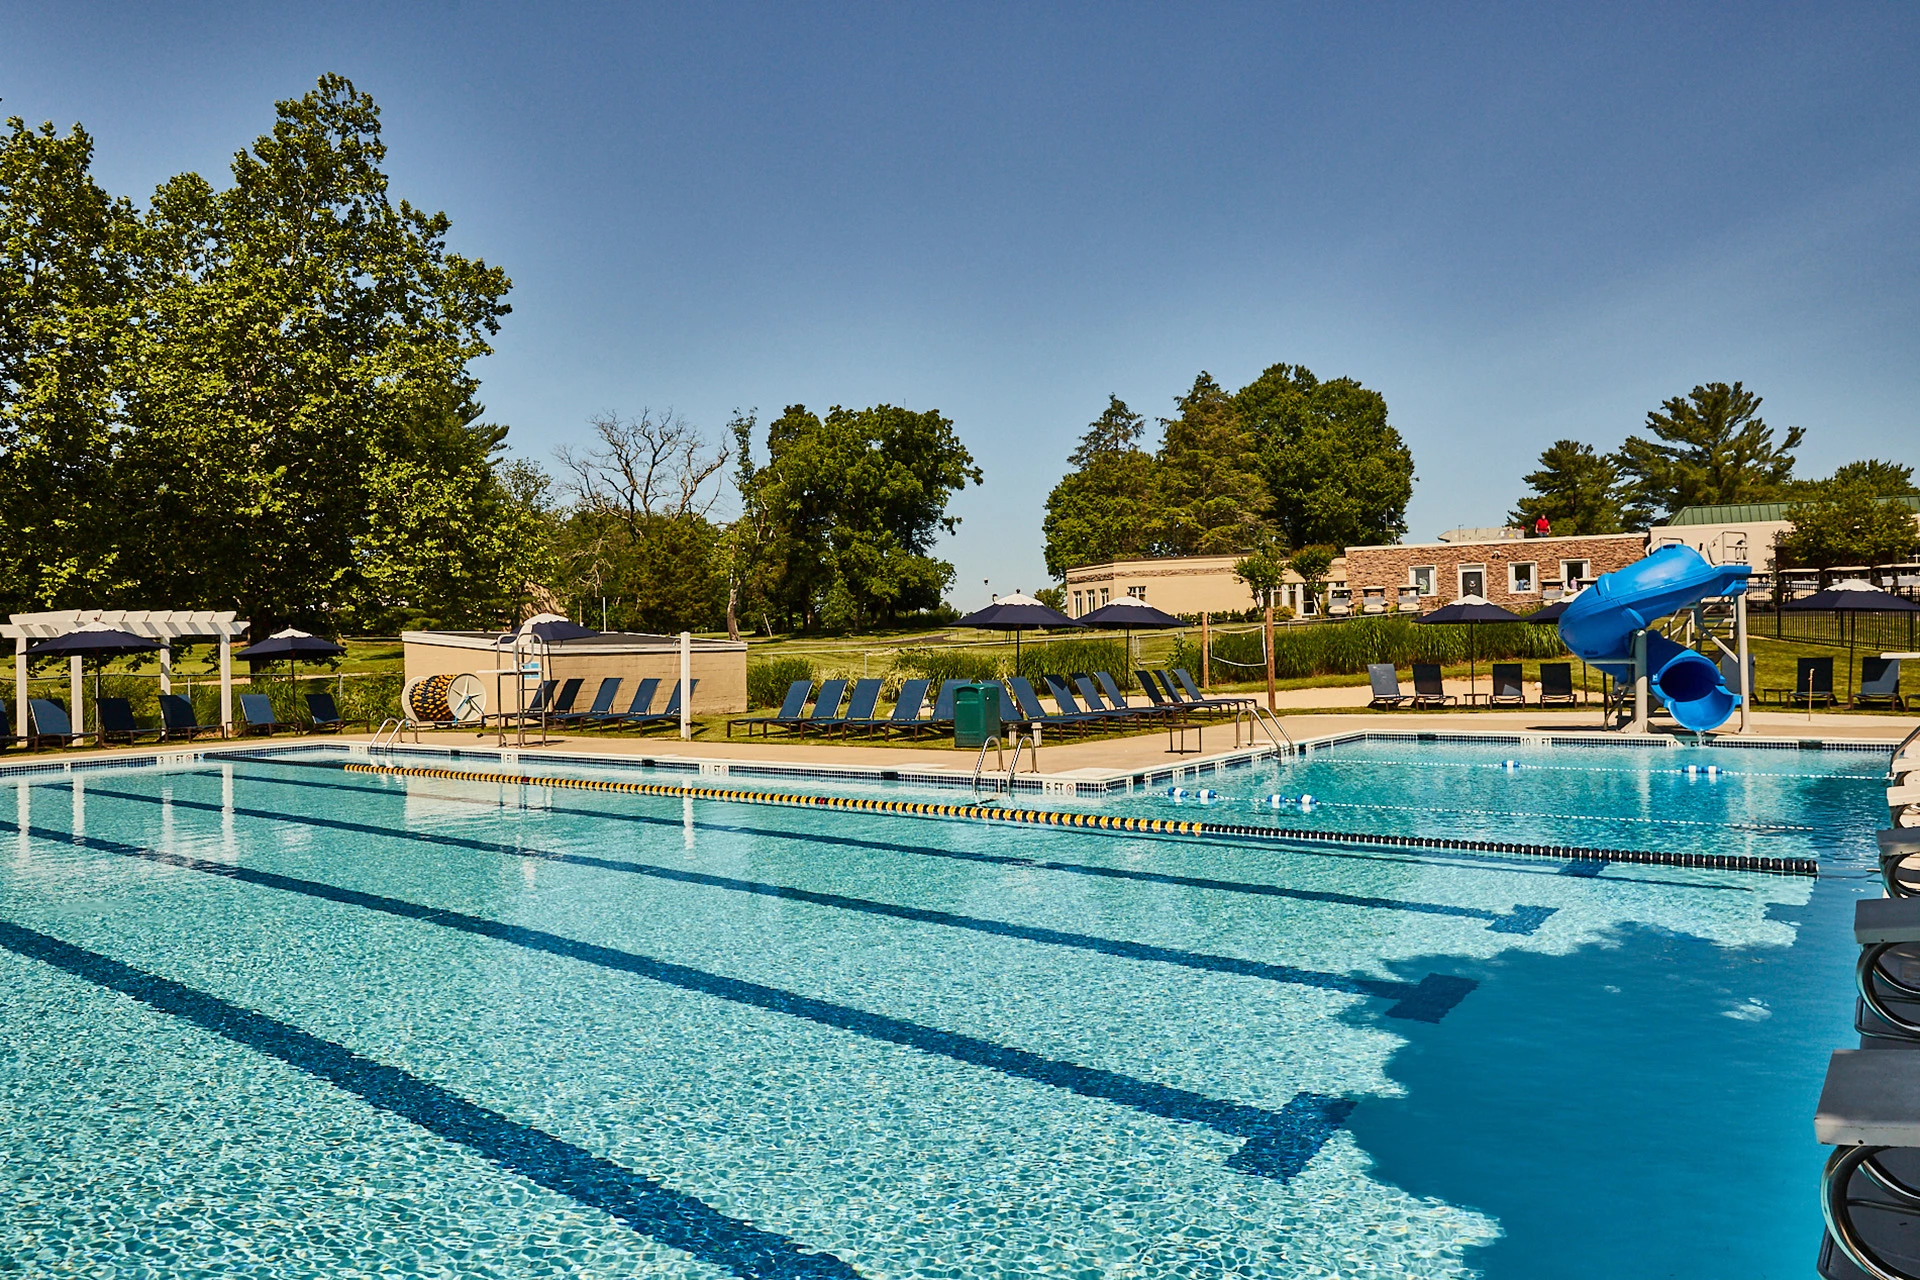 Norbeck Country Club - Pool